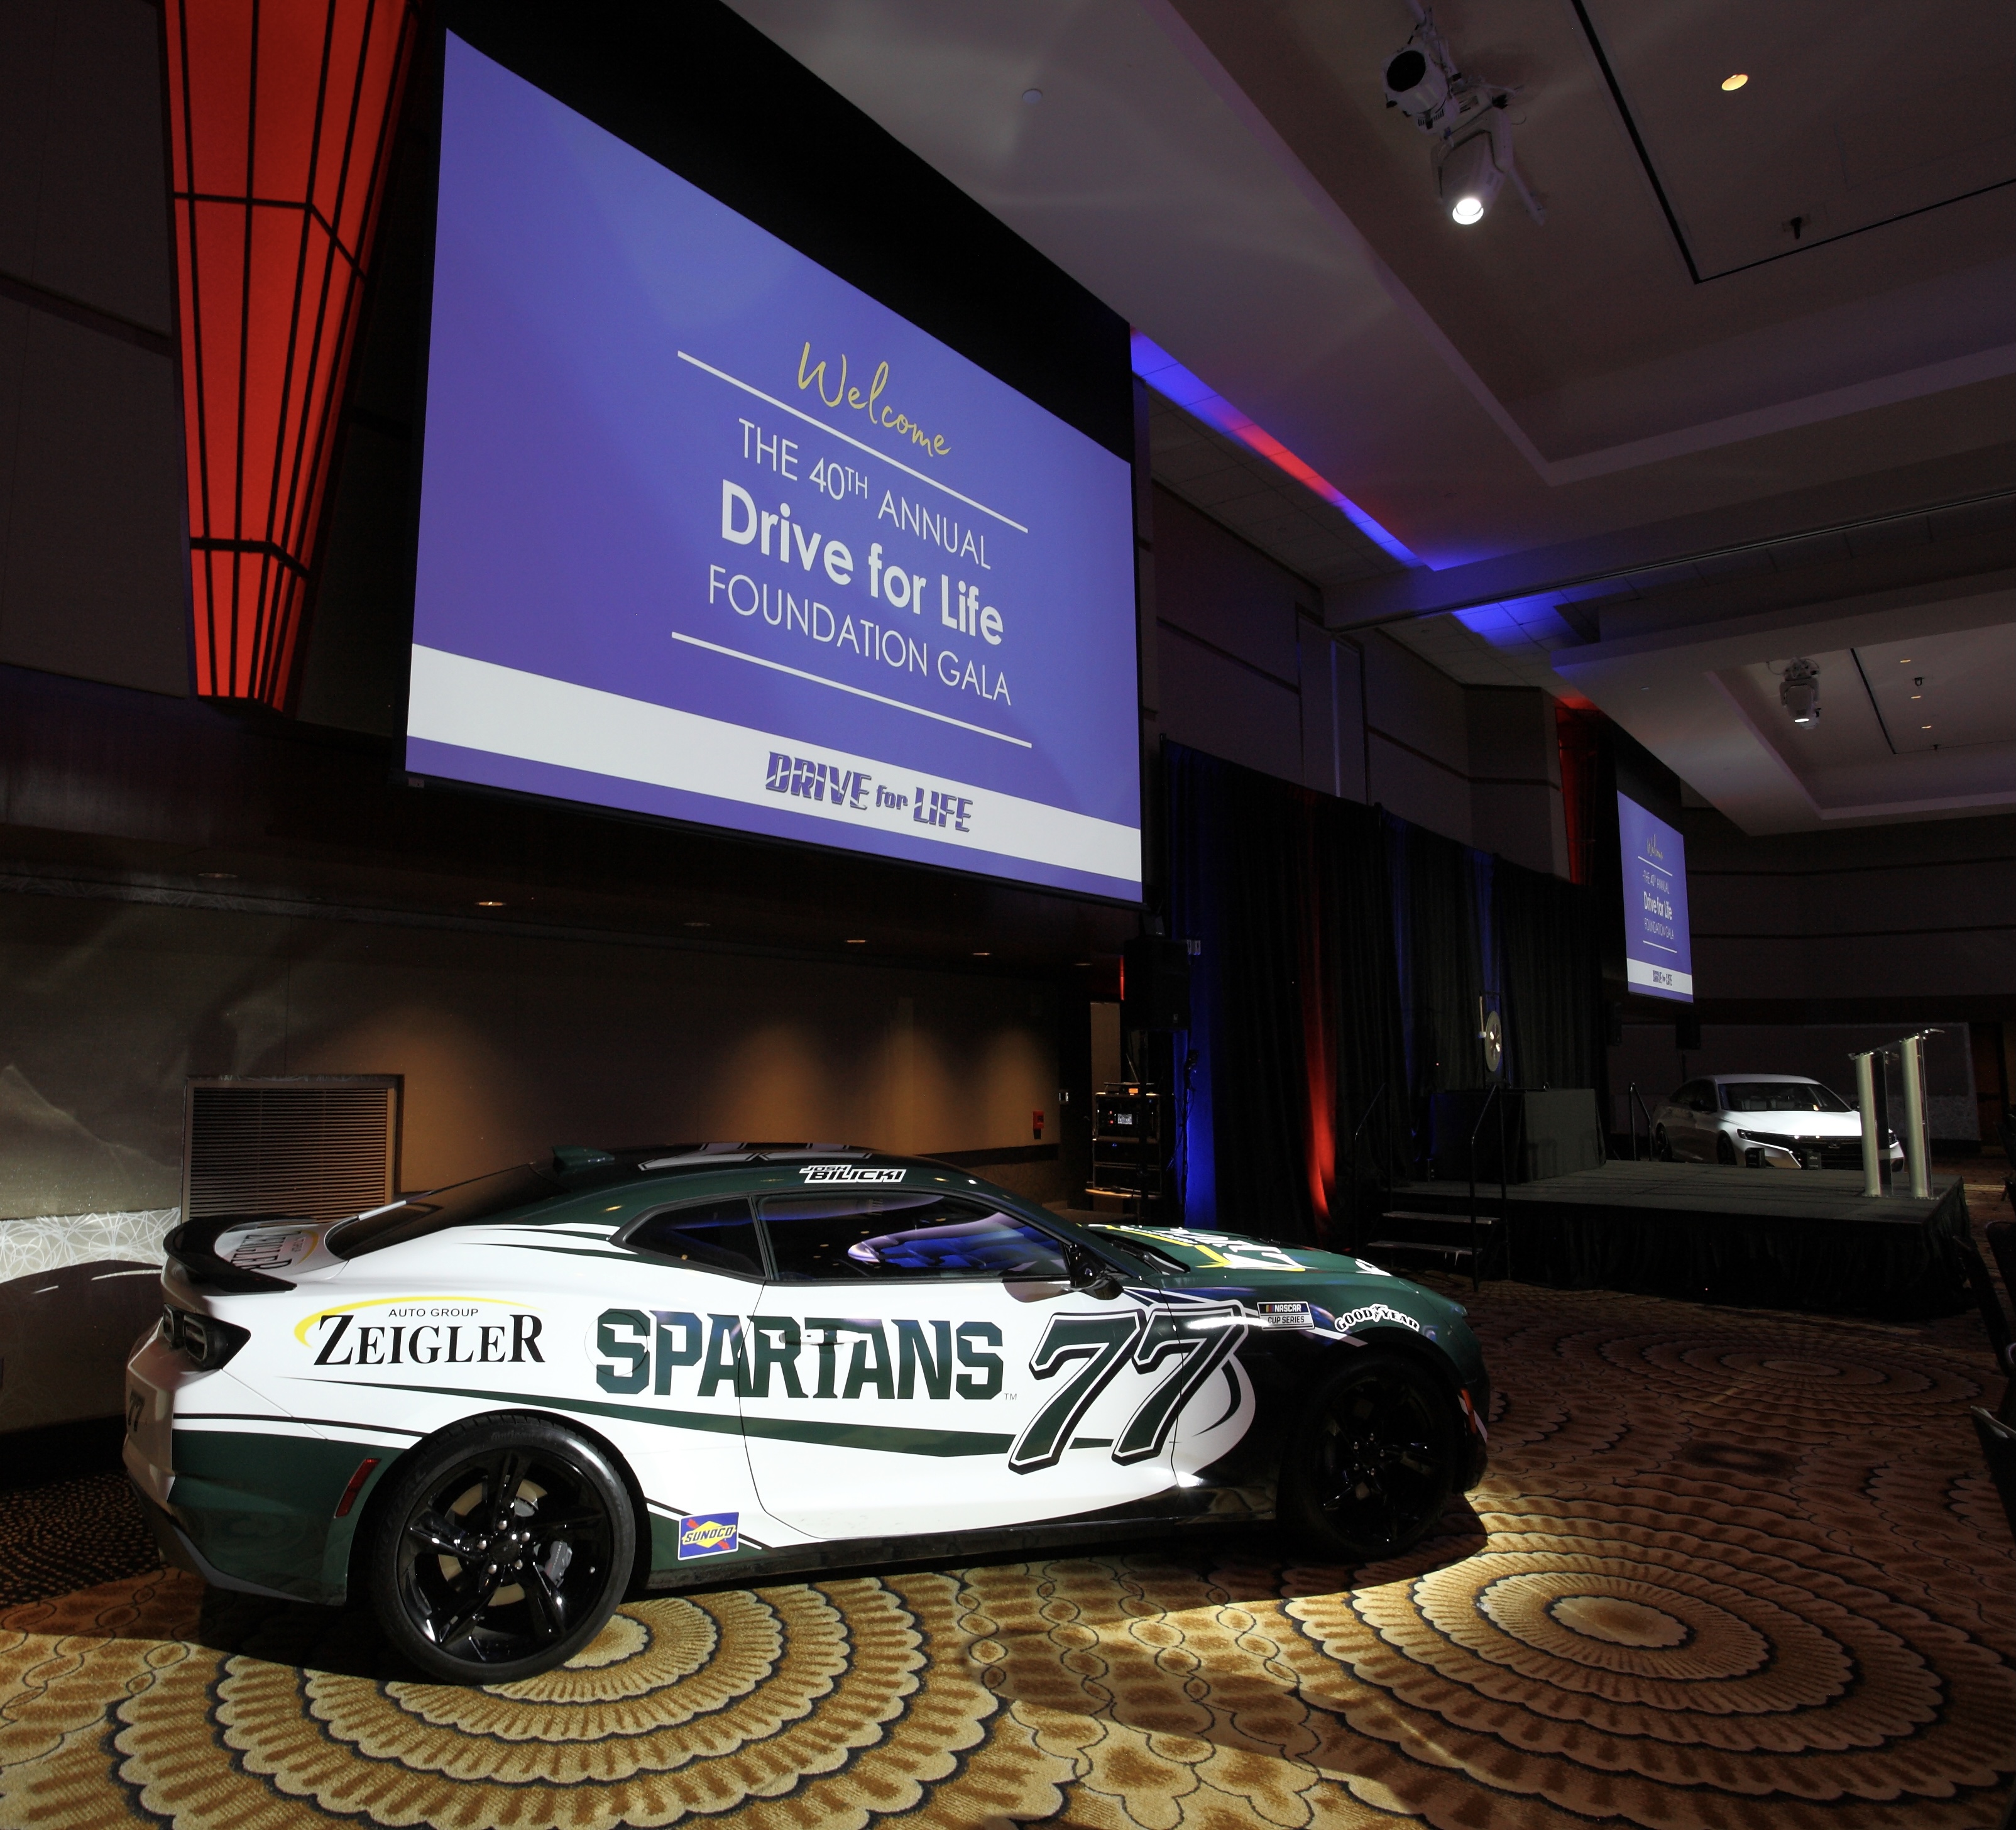 Zeigler 77 x MSU Spartans replica at the 40th Annual Drive for Life Foundation Gala-raising over $2M for charity